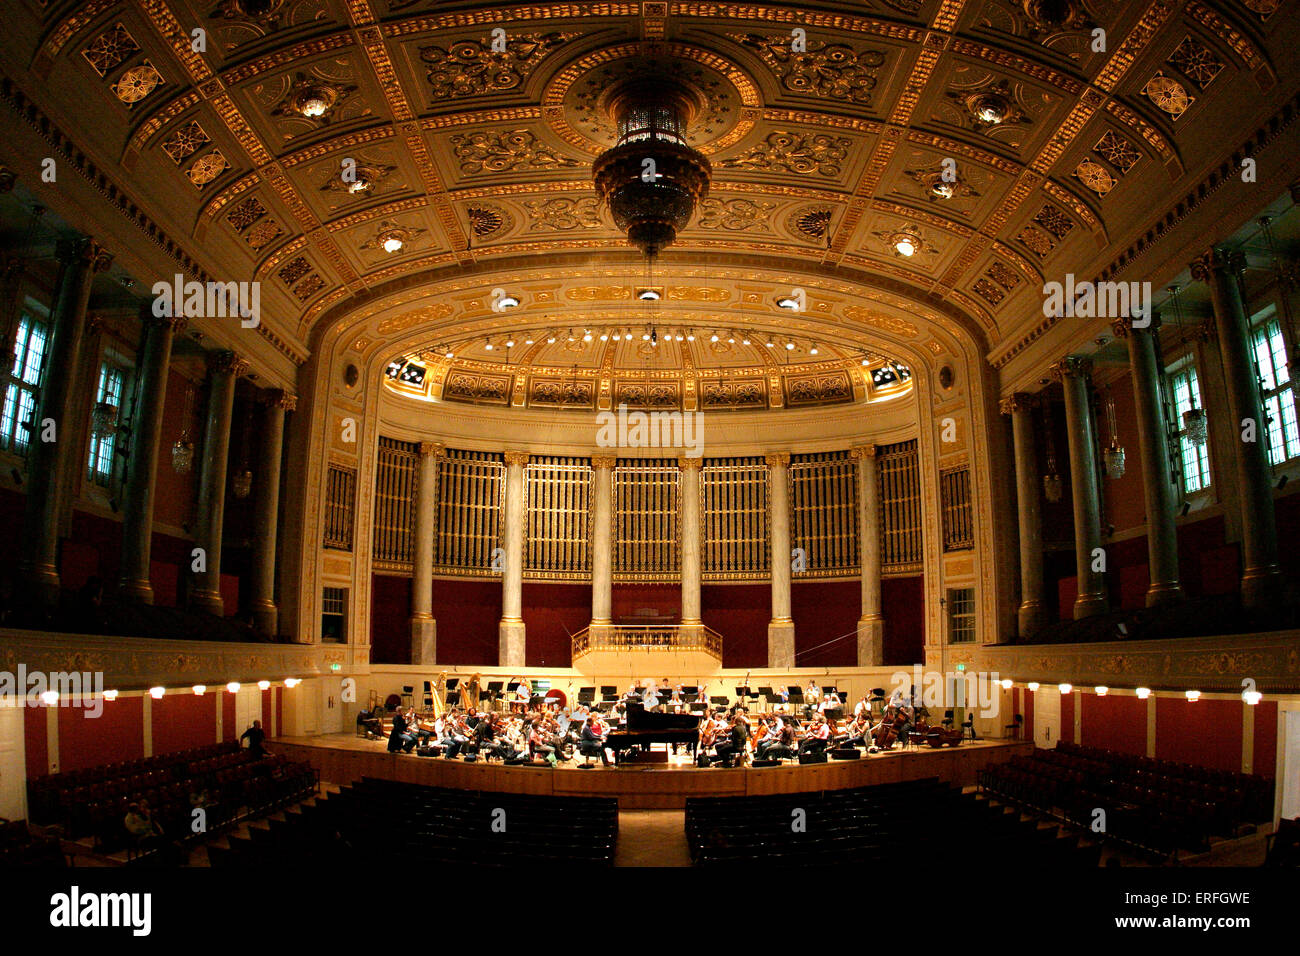 Vienna Konzerthaus, interior. Rehearsal in progress. BBC National orchestra of Wales, conductor, T.Yuasa, Pianist Robert Hamlin. Overview of orchestra. Stock Photo